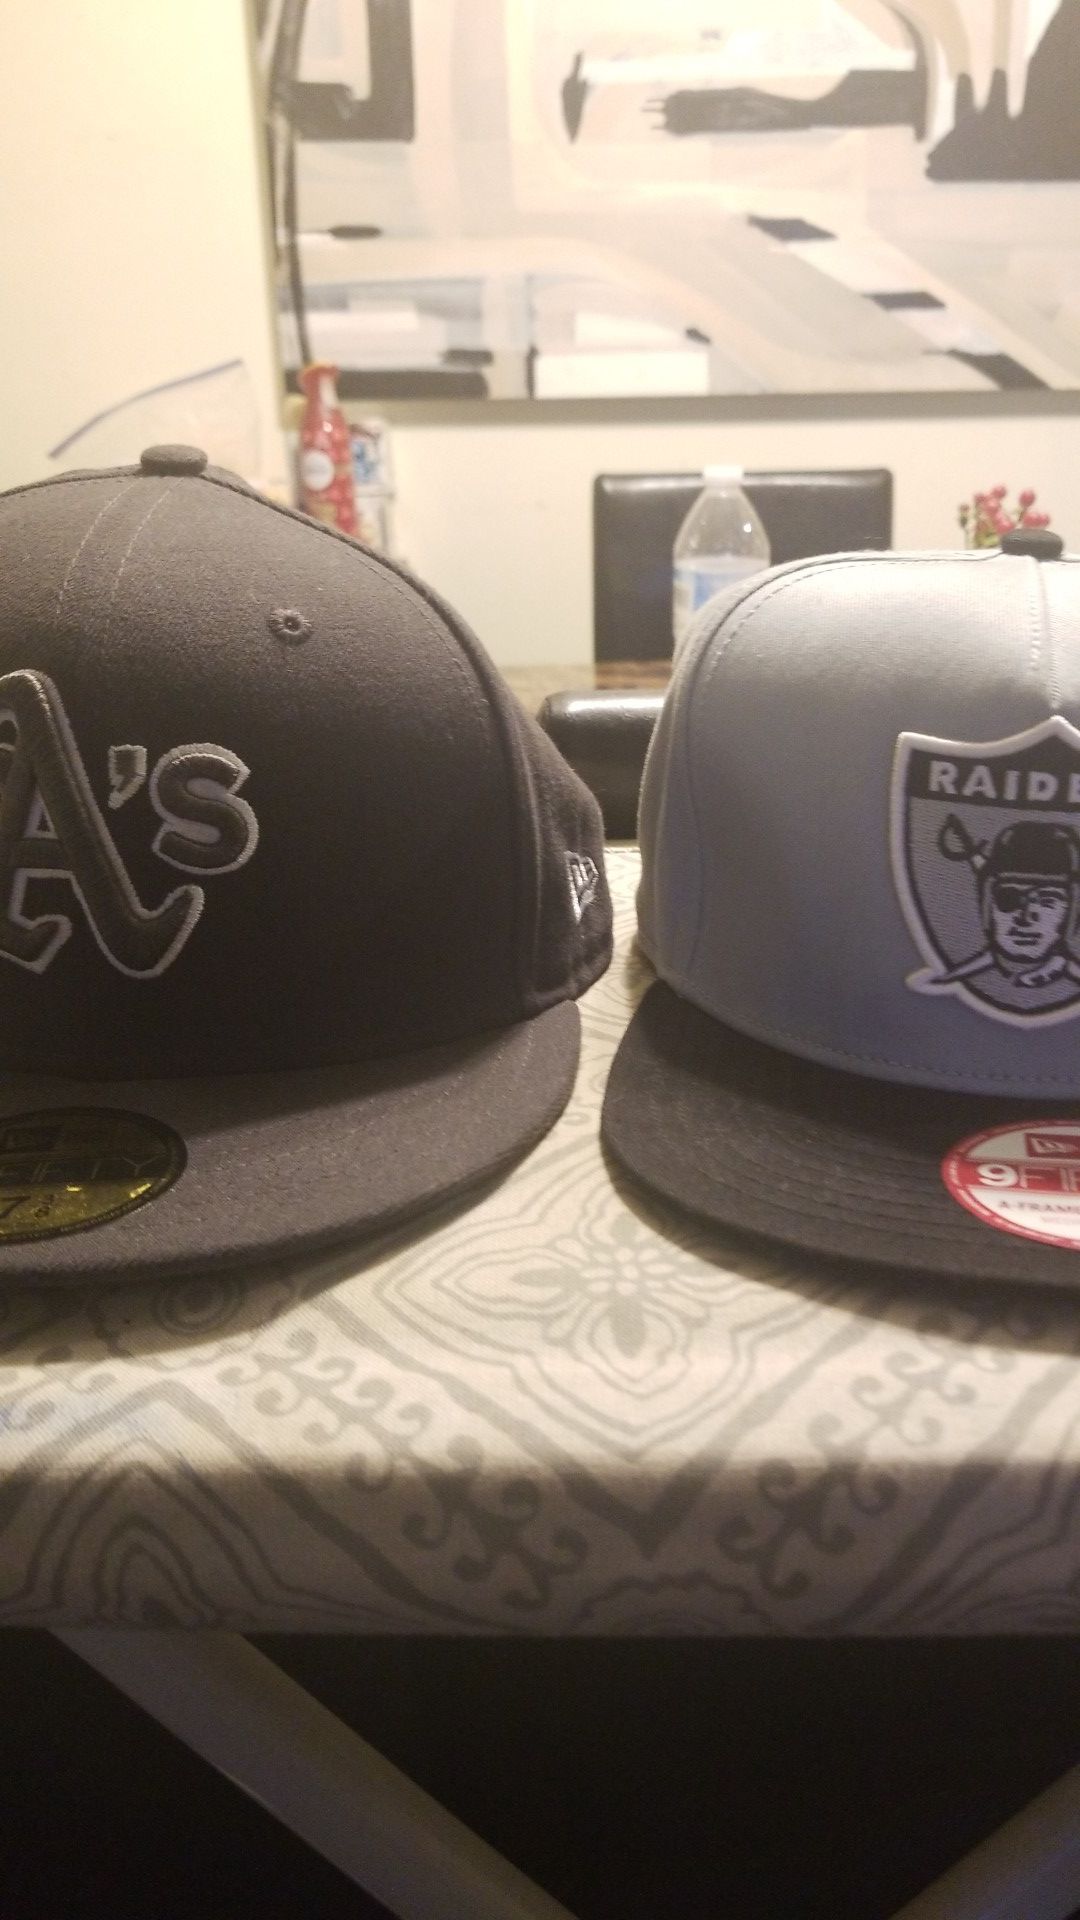 Oakland Athletics hat and Oakland Raiders hat